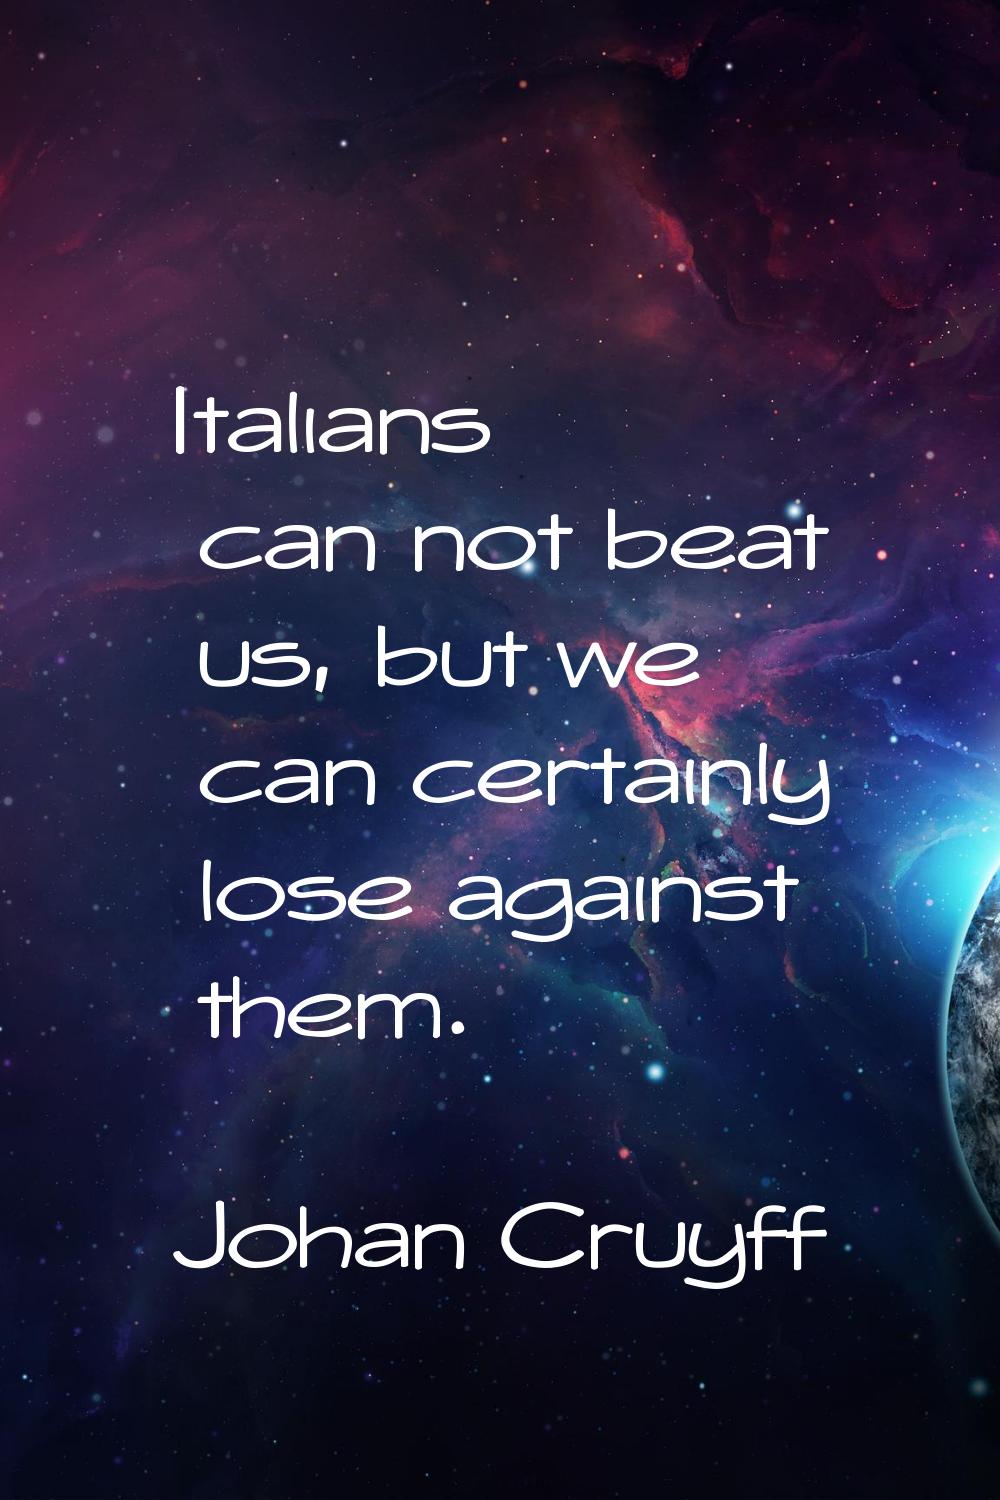 Italians can not beat us, but we can certainly lose against them.